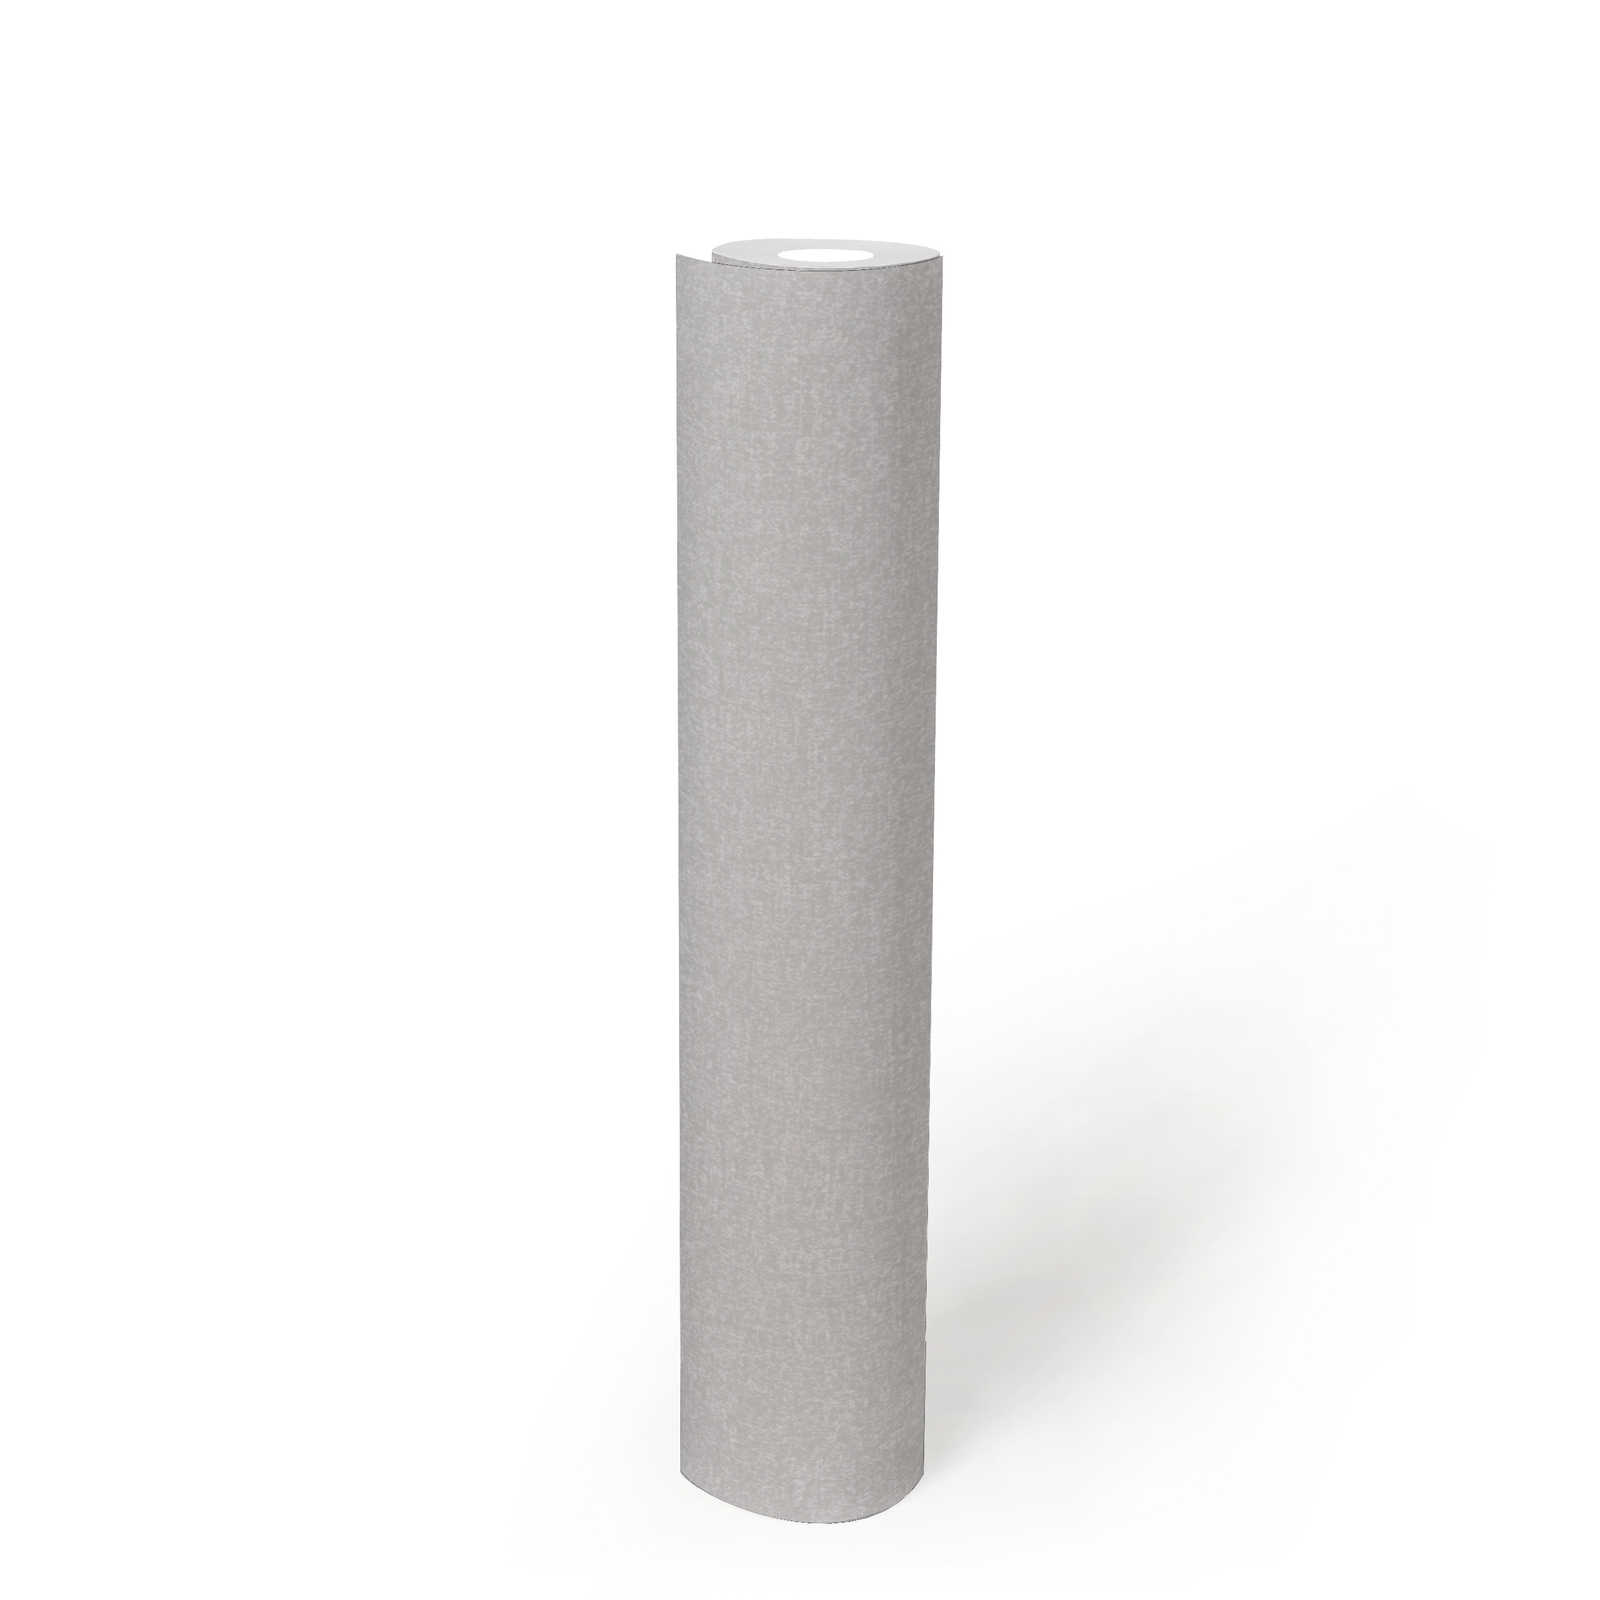             Non-woven wallpaper plain with fine textured pattern - light grey
        